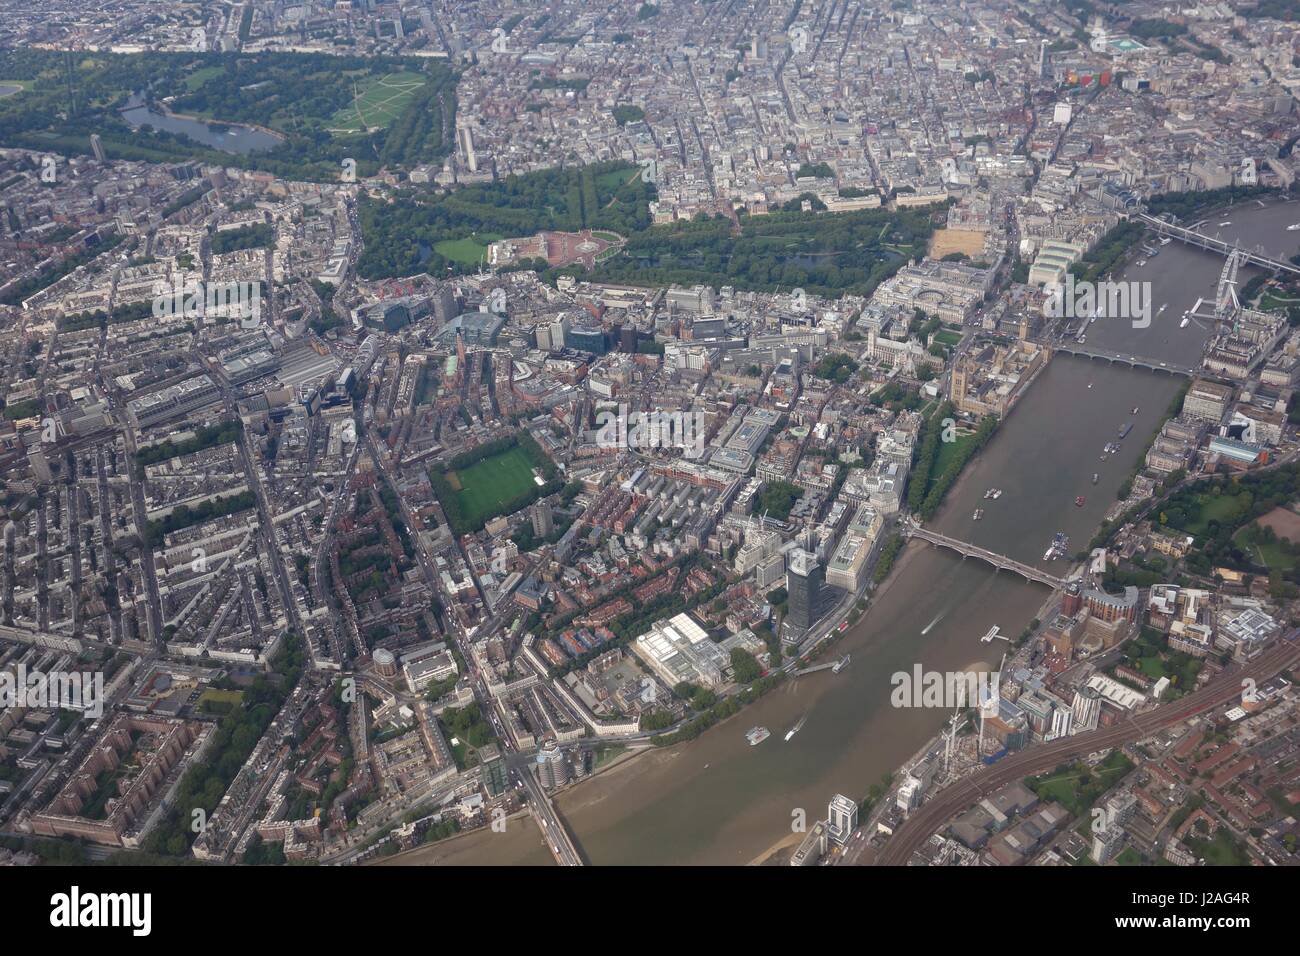 Aerial view of London and the River Thames with Buckingham Palace and the Palace of Westminster in view Stock Photo